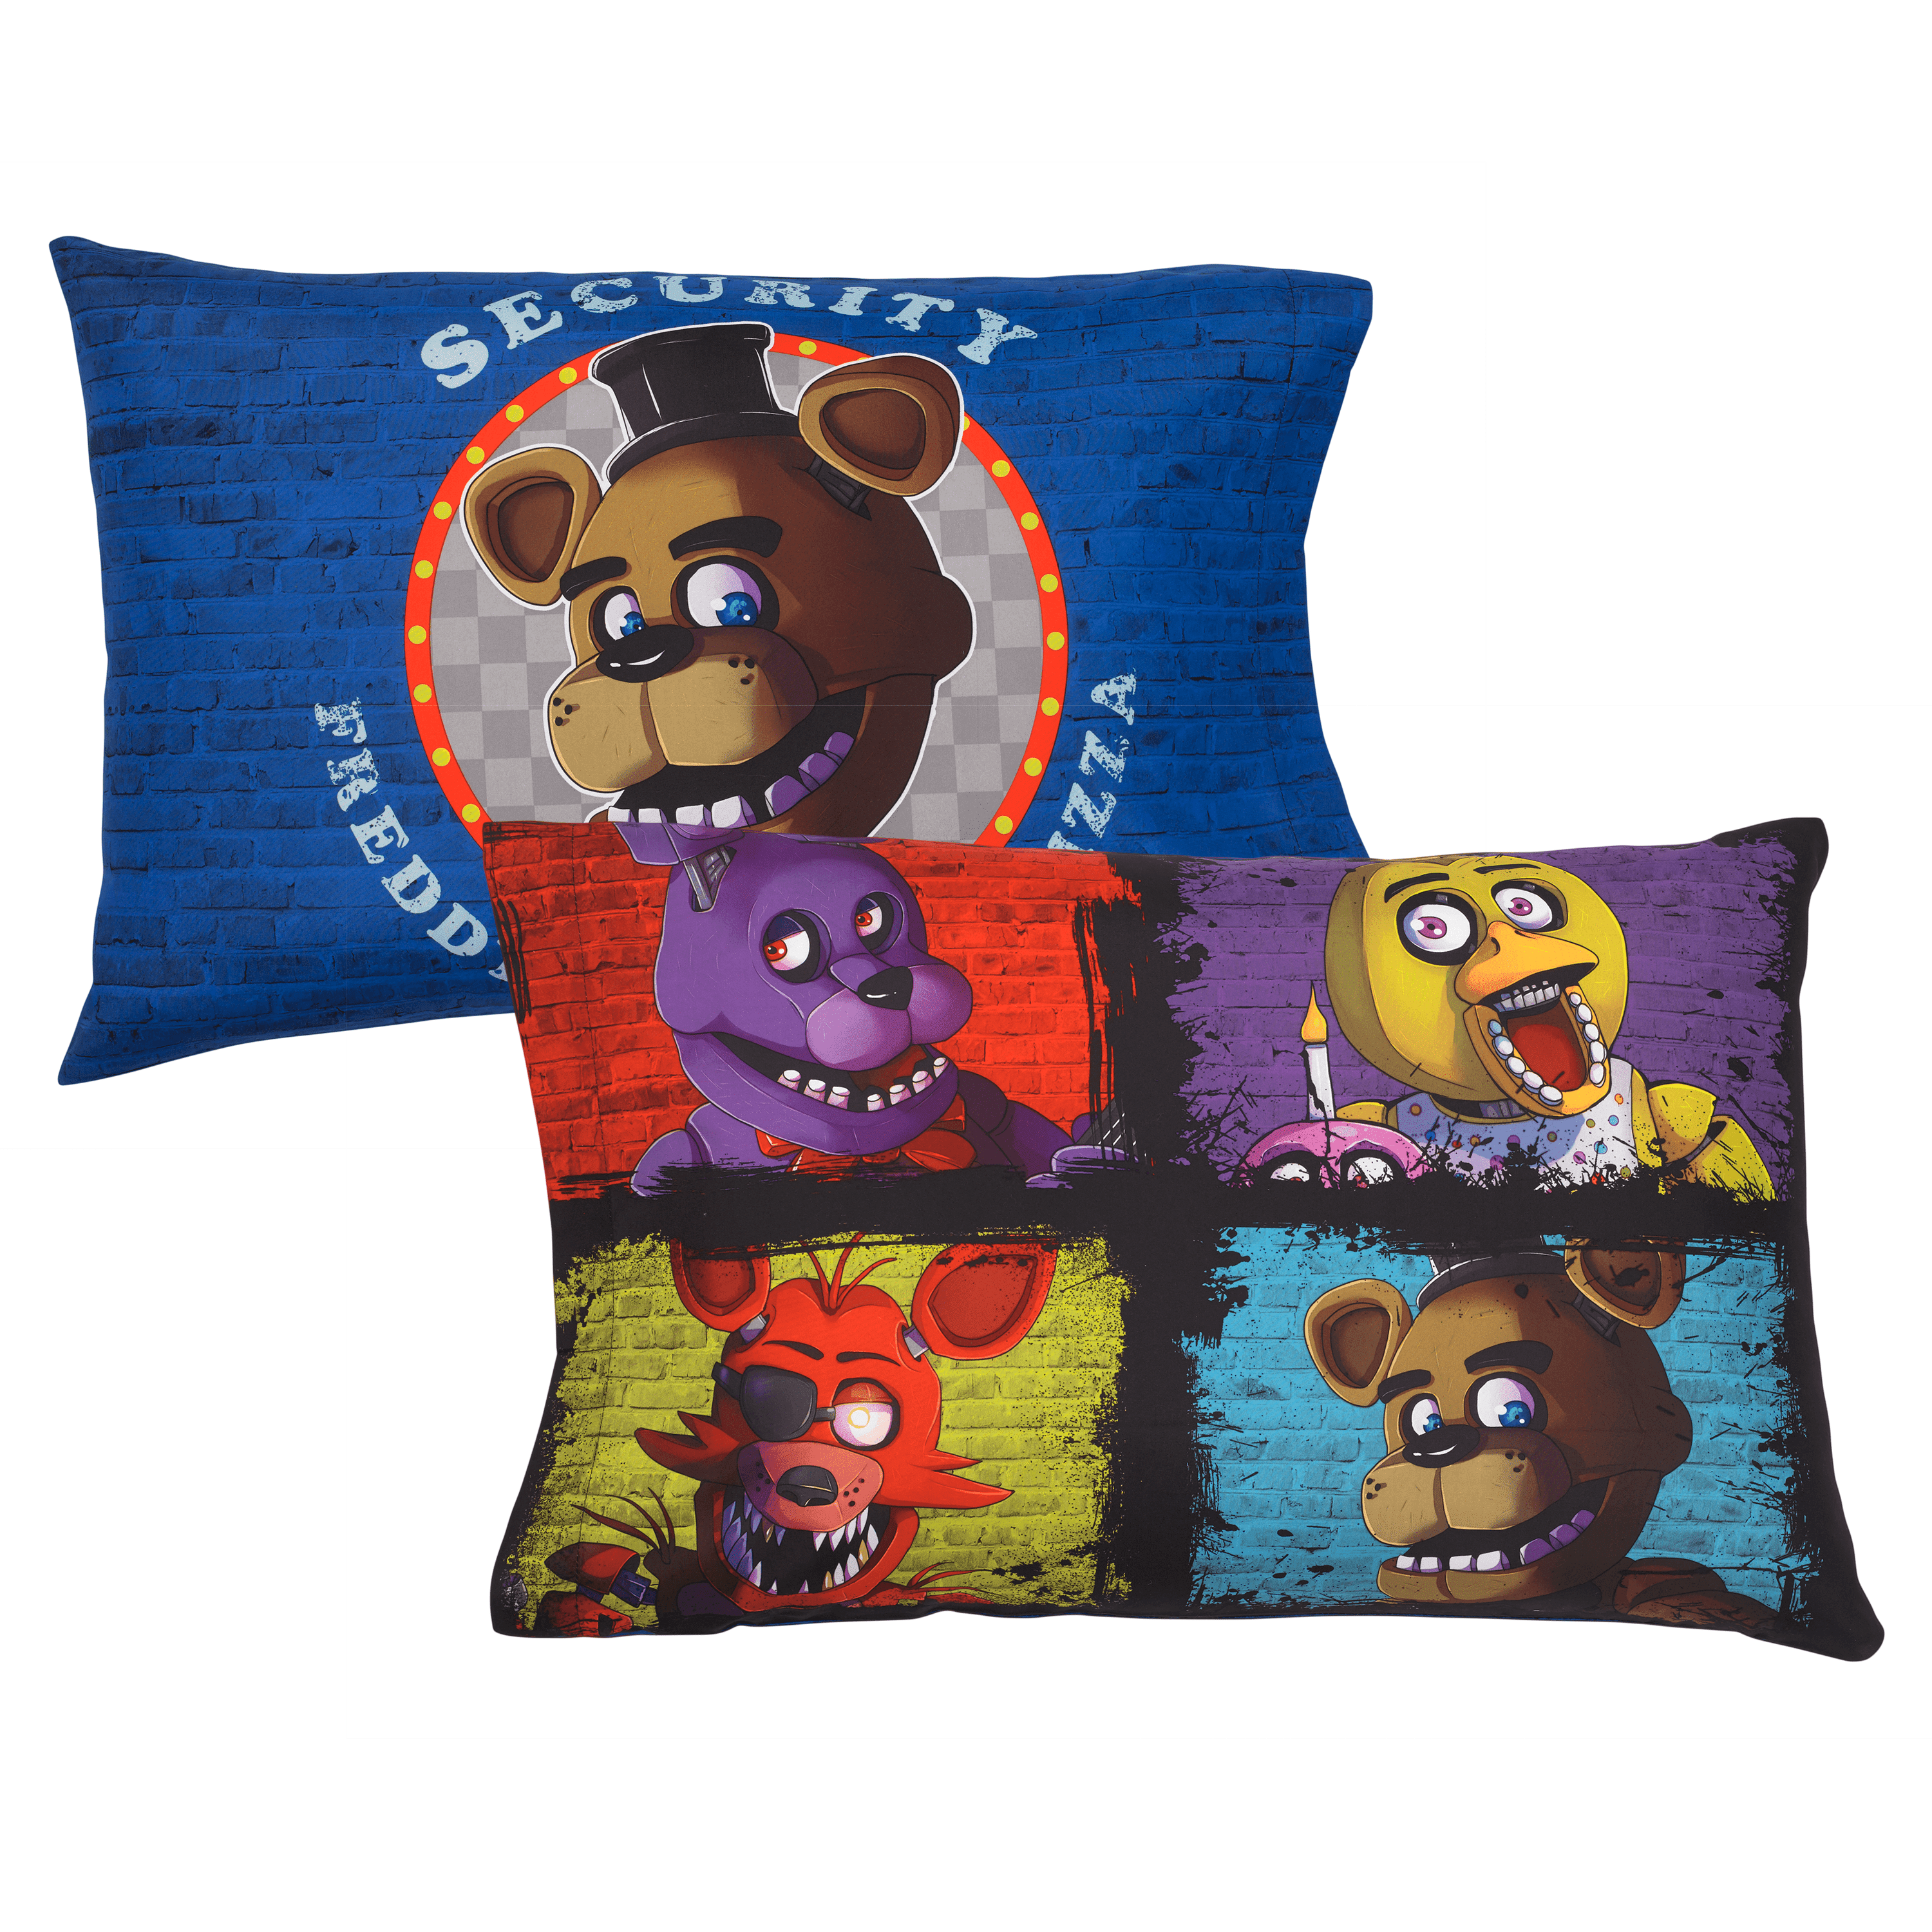 Toy Freddy Bedding Set Circus Baby Ice-Cream Bedding Sheet Gifts